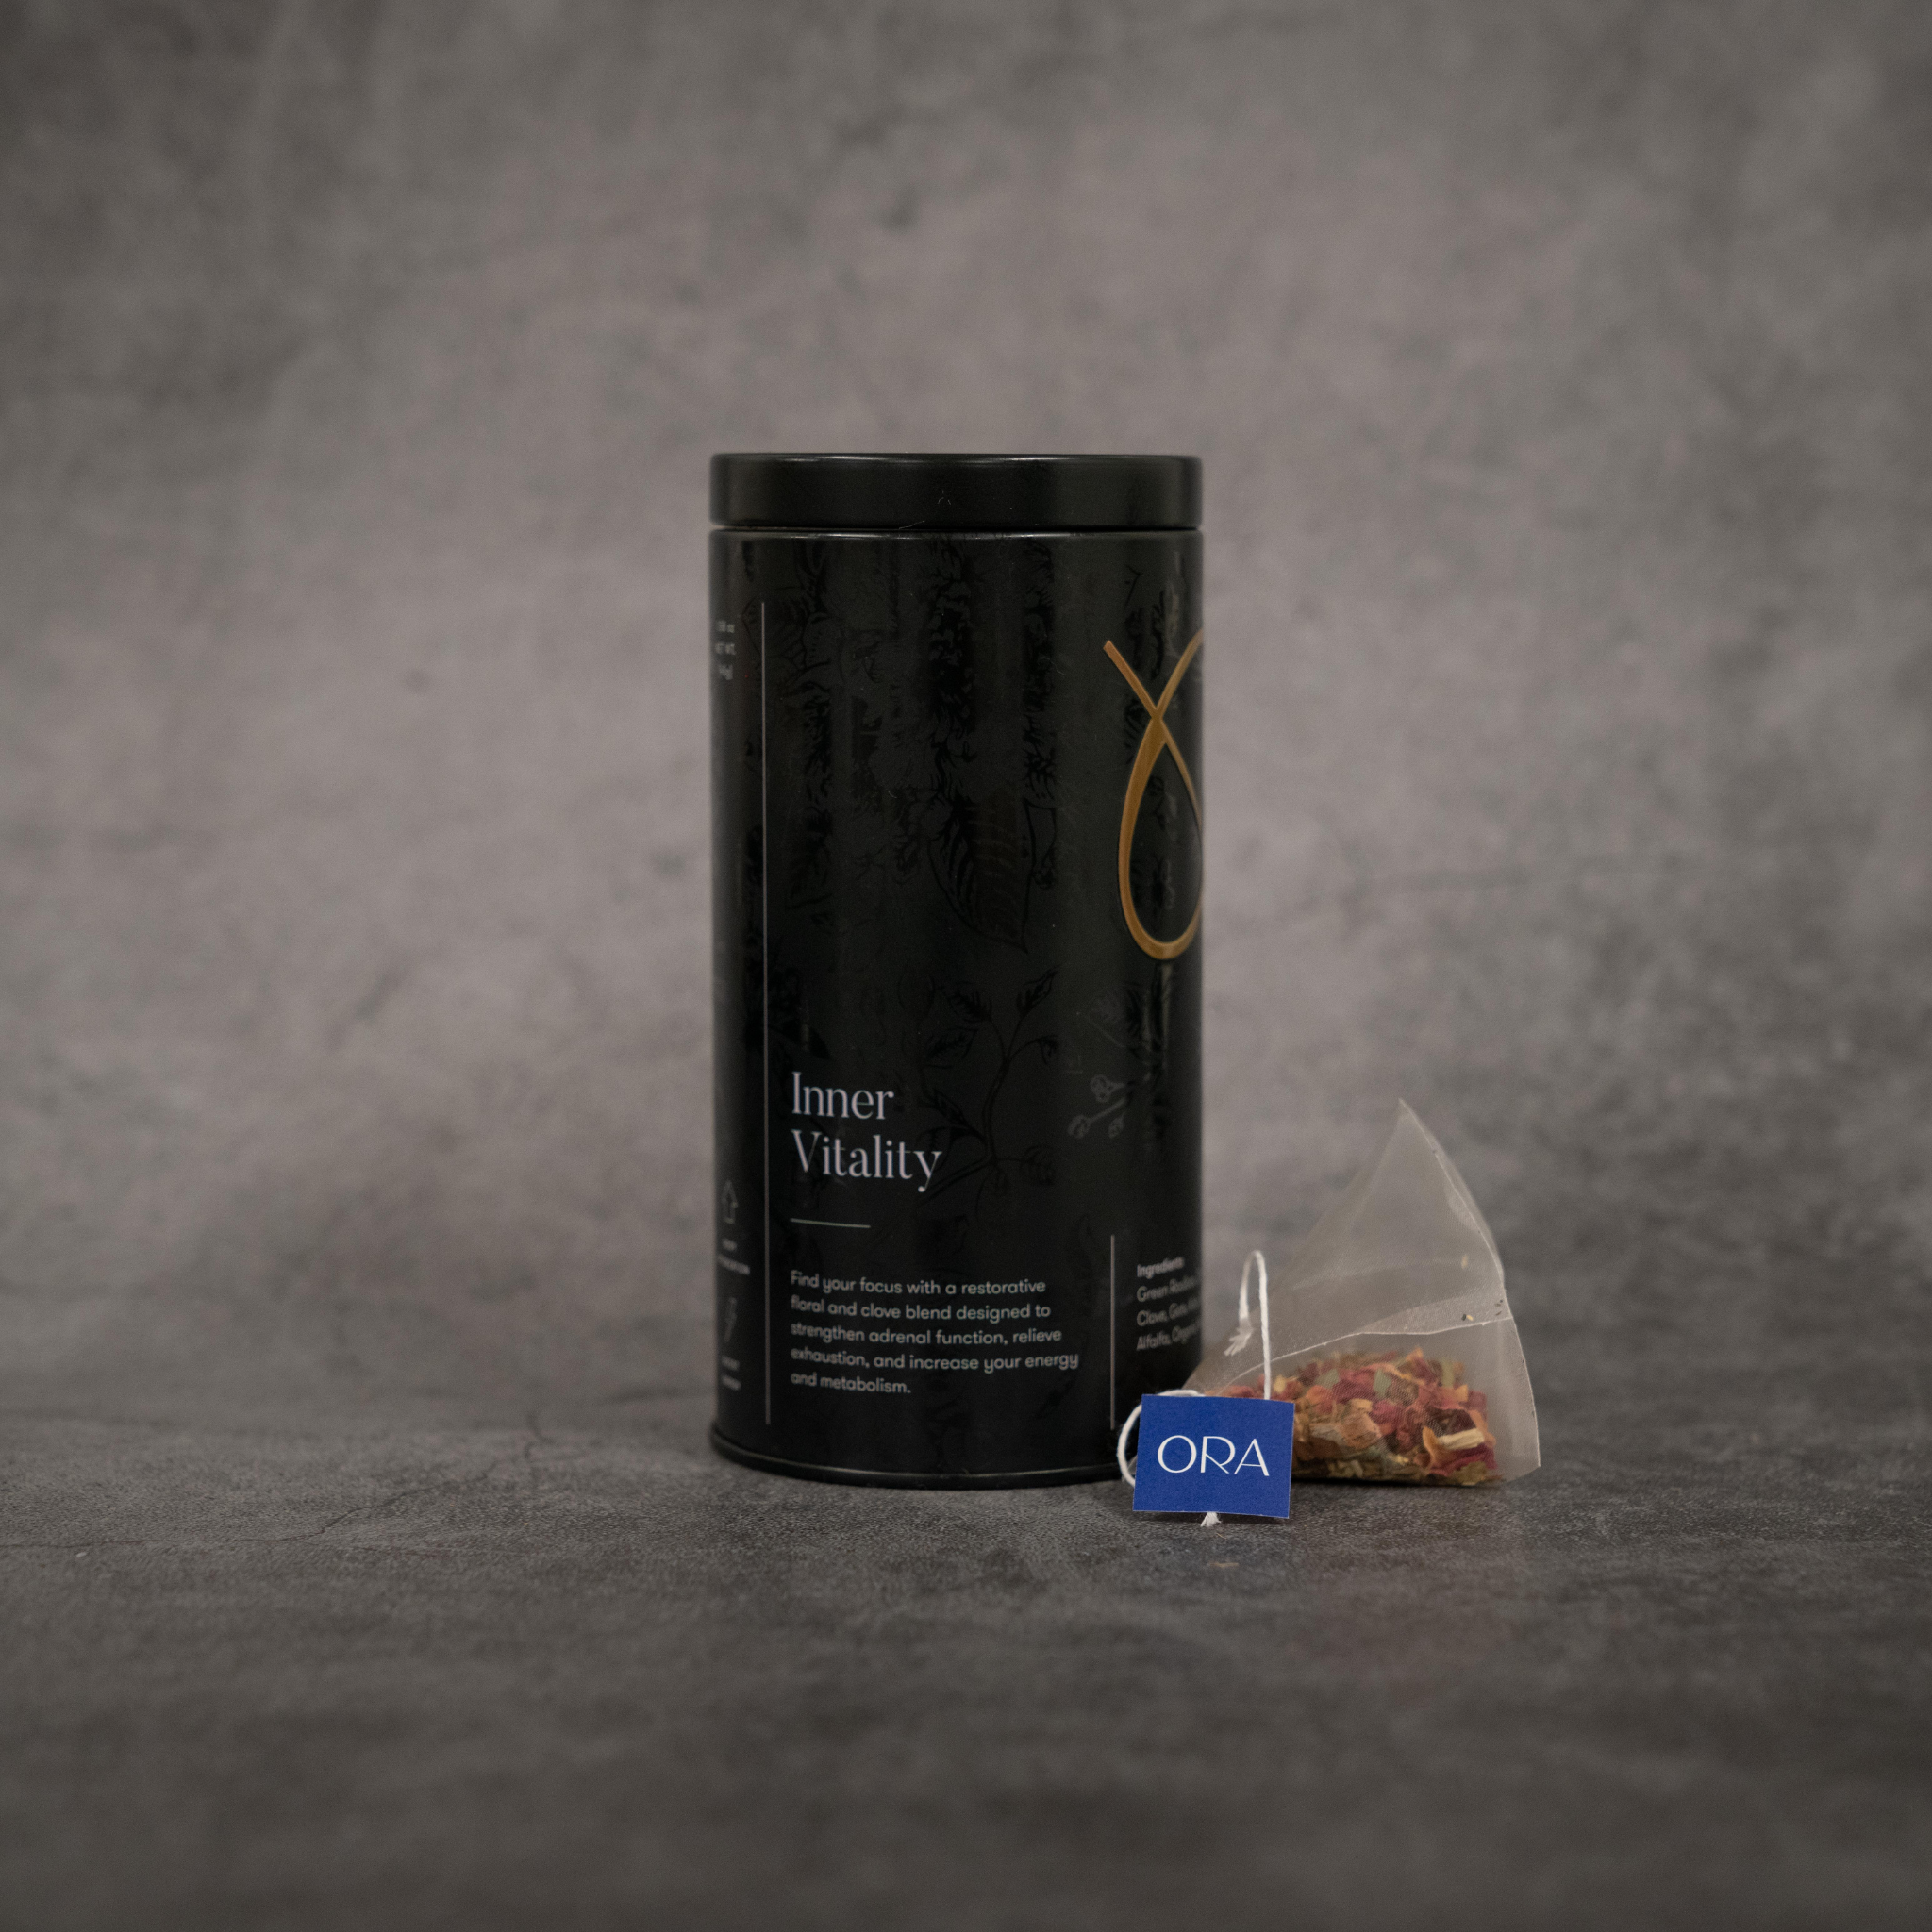 On the left, a black metal cylinder tin of tea reading "Inner Vitality". On the right, a translucent tea bag with a string printed with the ORA logo.